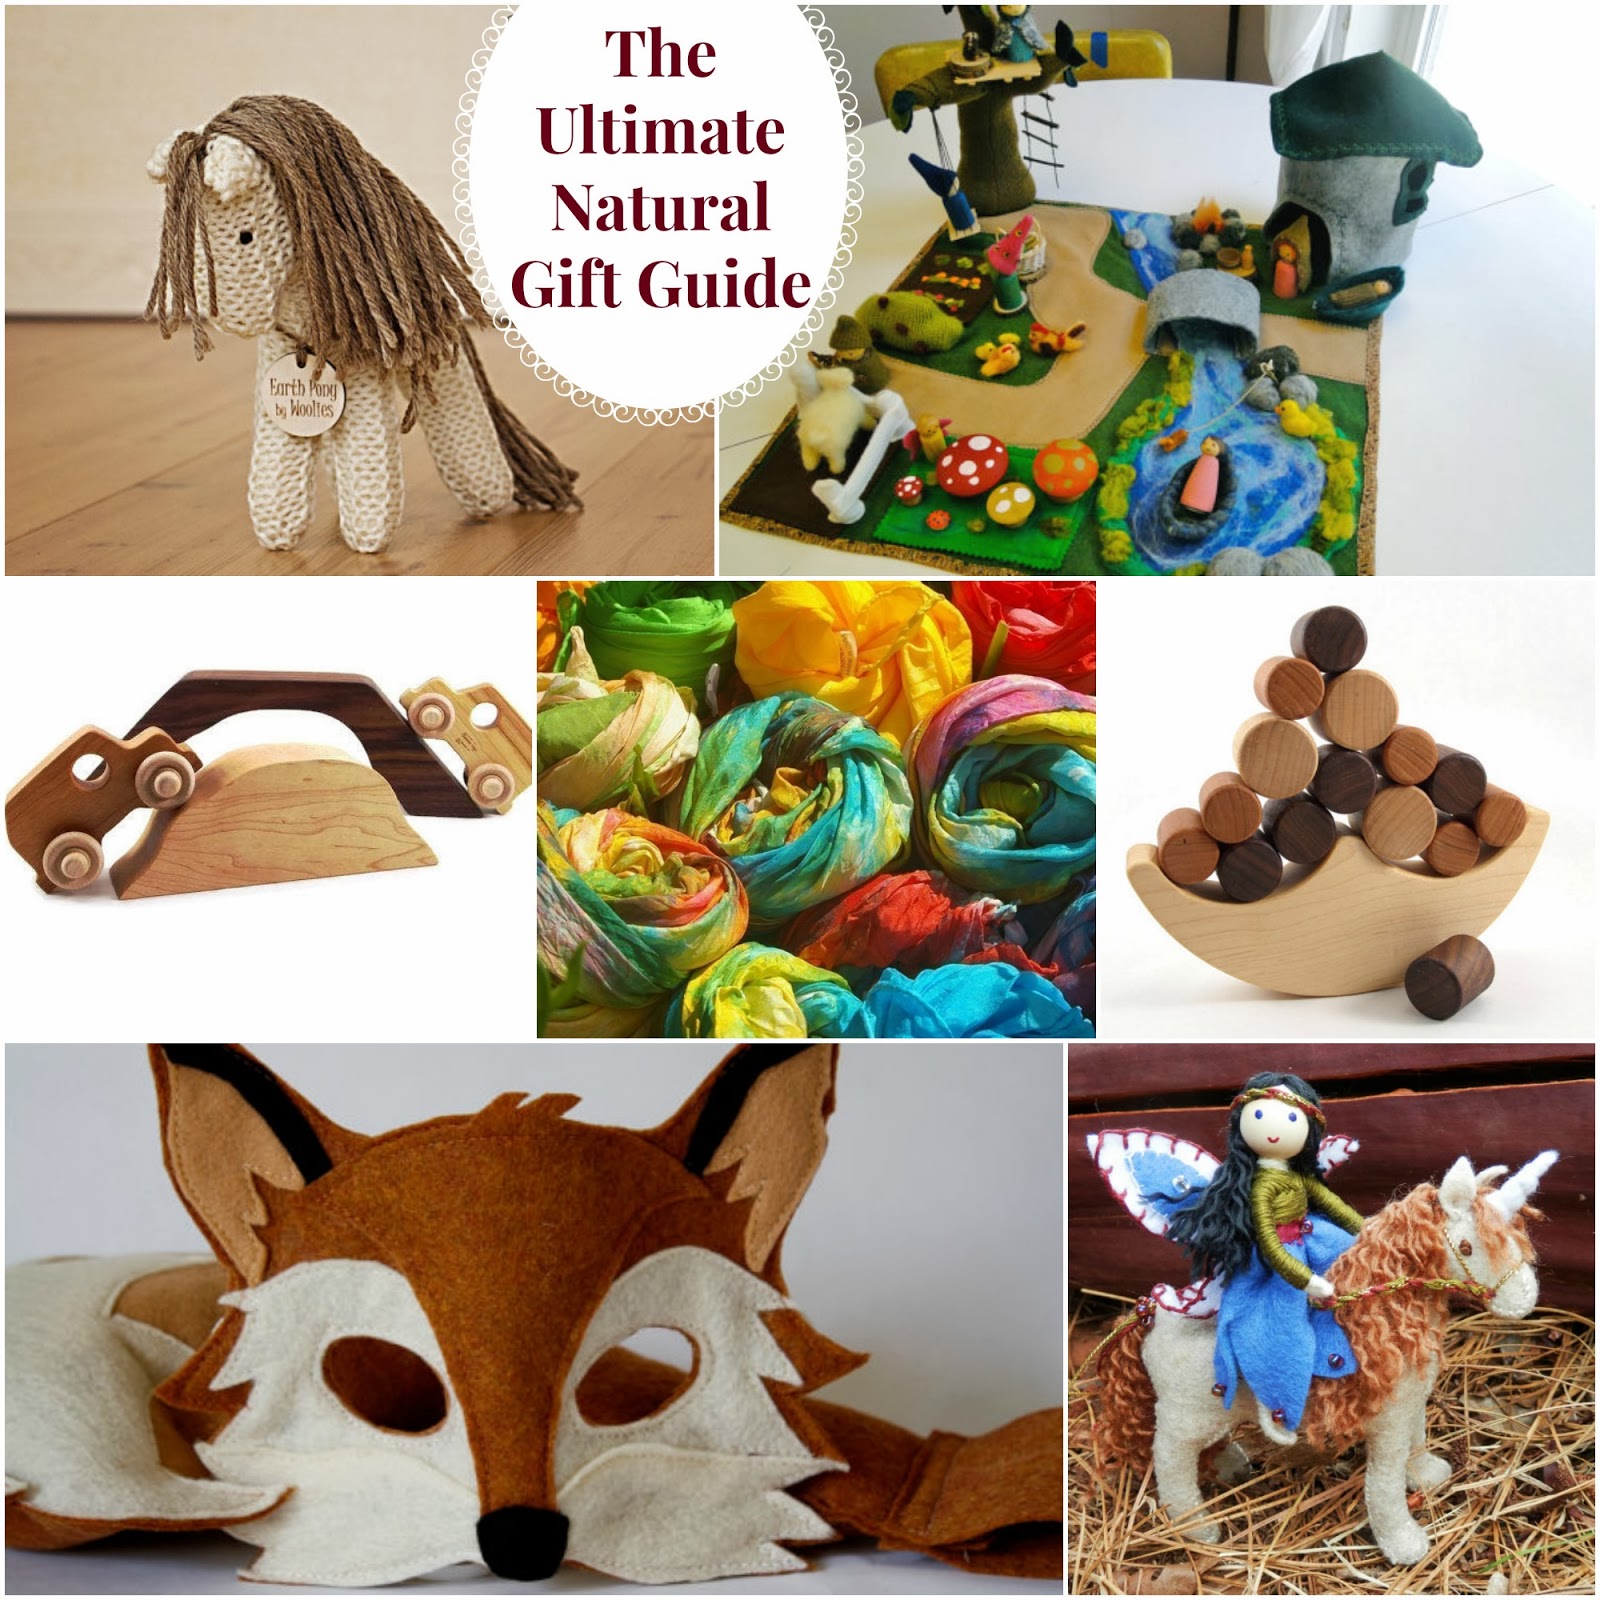 The Ultimate Natural gift Guide, Organic, eco friendly toys, gifts, healthy living for kids and families, handmade toys, www.naturalbeachliving.com